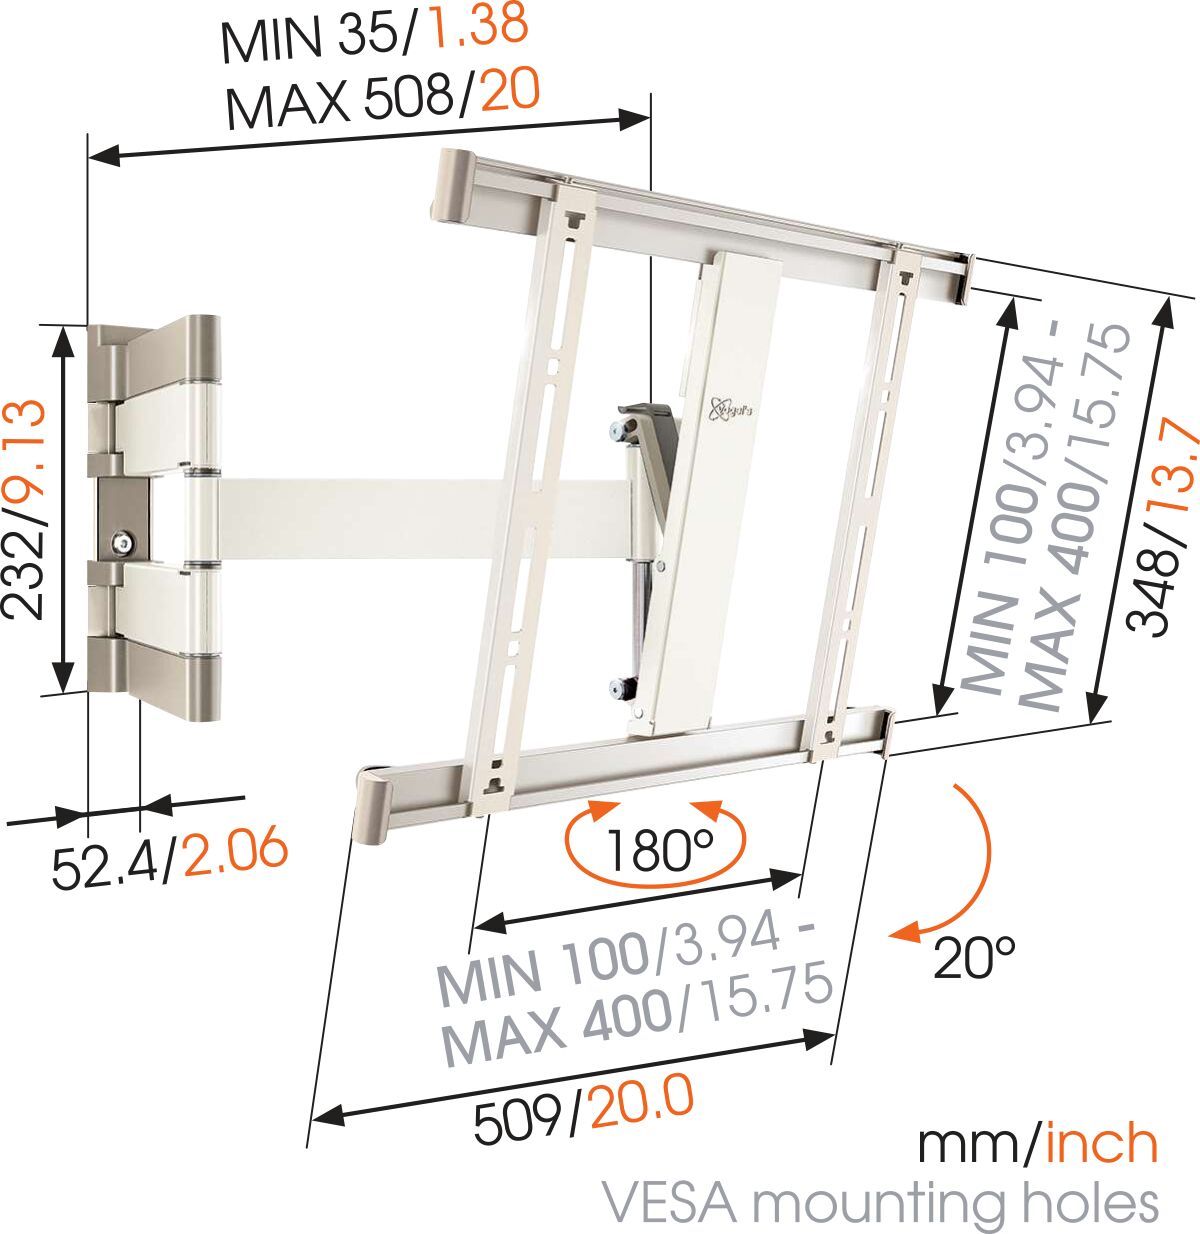 Vogel's THIN 245 UltraThin Full-Motion TV Wall Mount (white) - Suitable for 26 up to 55 inch TVs - Full motion (up to 180°) - Tilt up to 20° - Dimensions